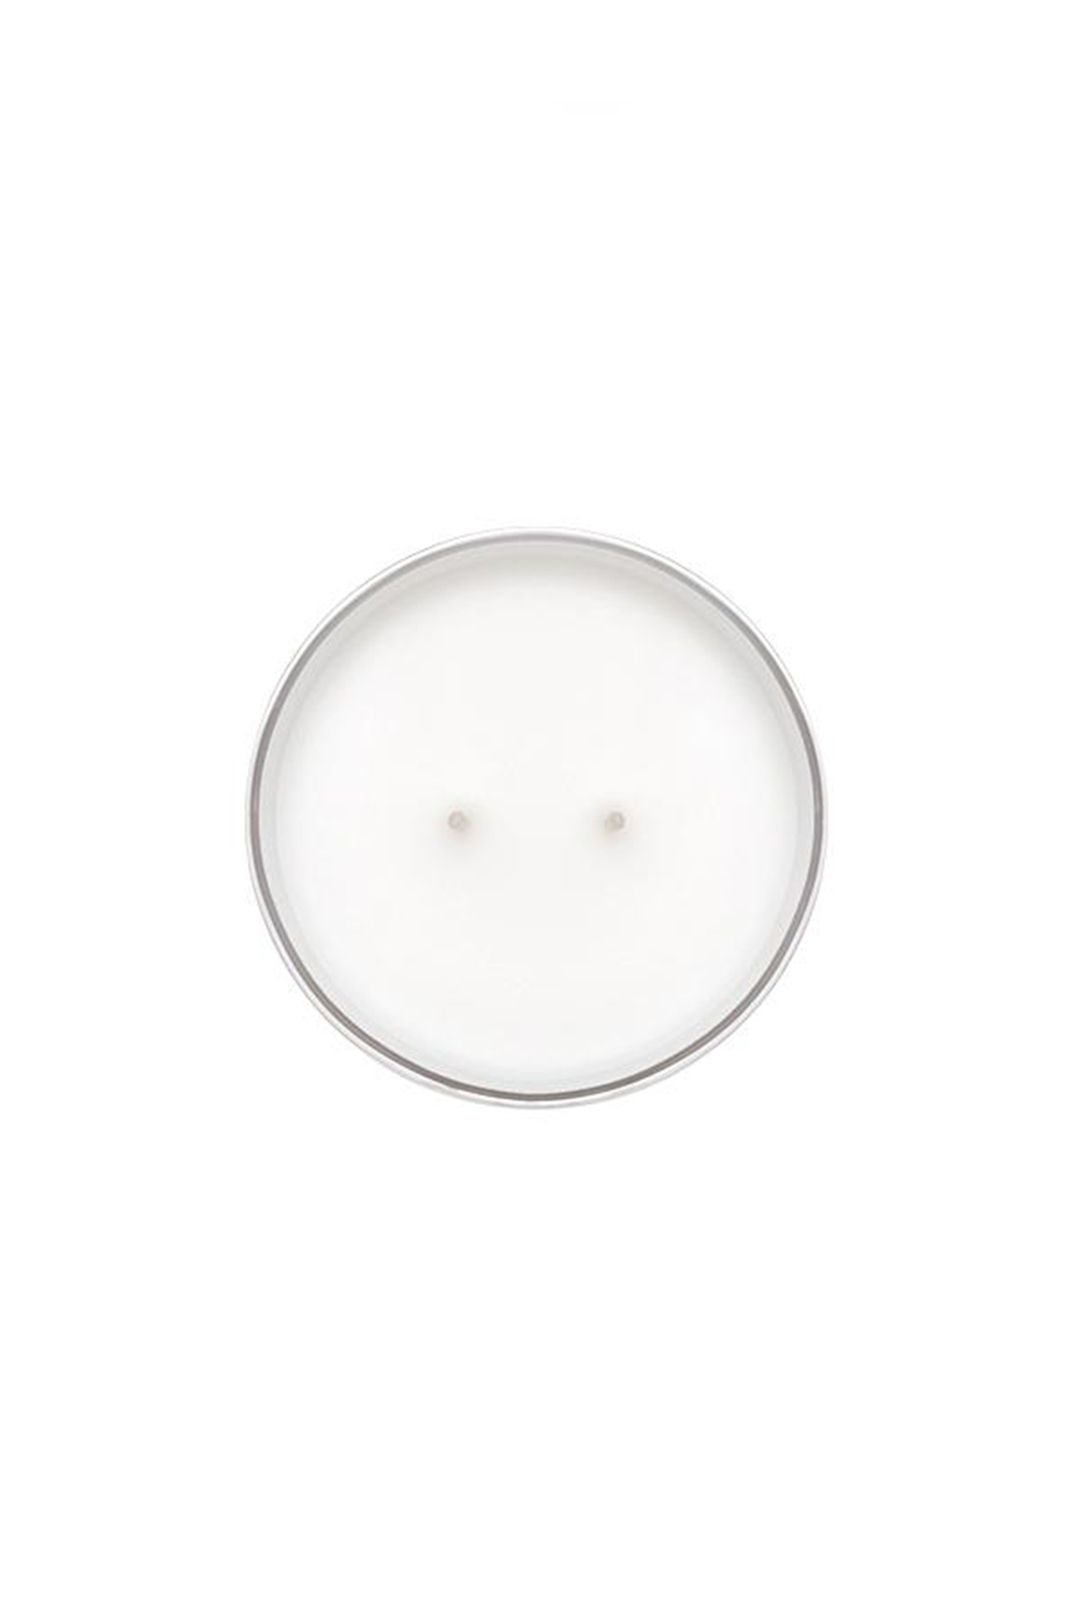 damselfly-collective-everythings-ok-large-candle-top